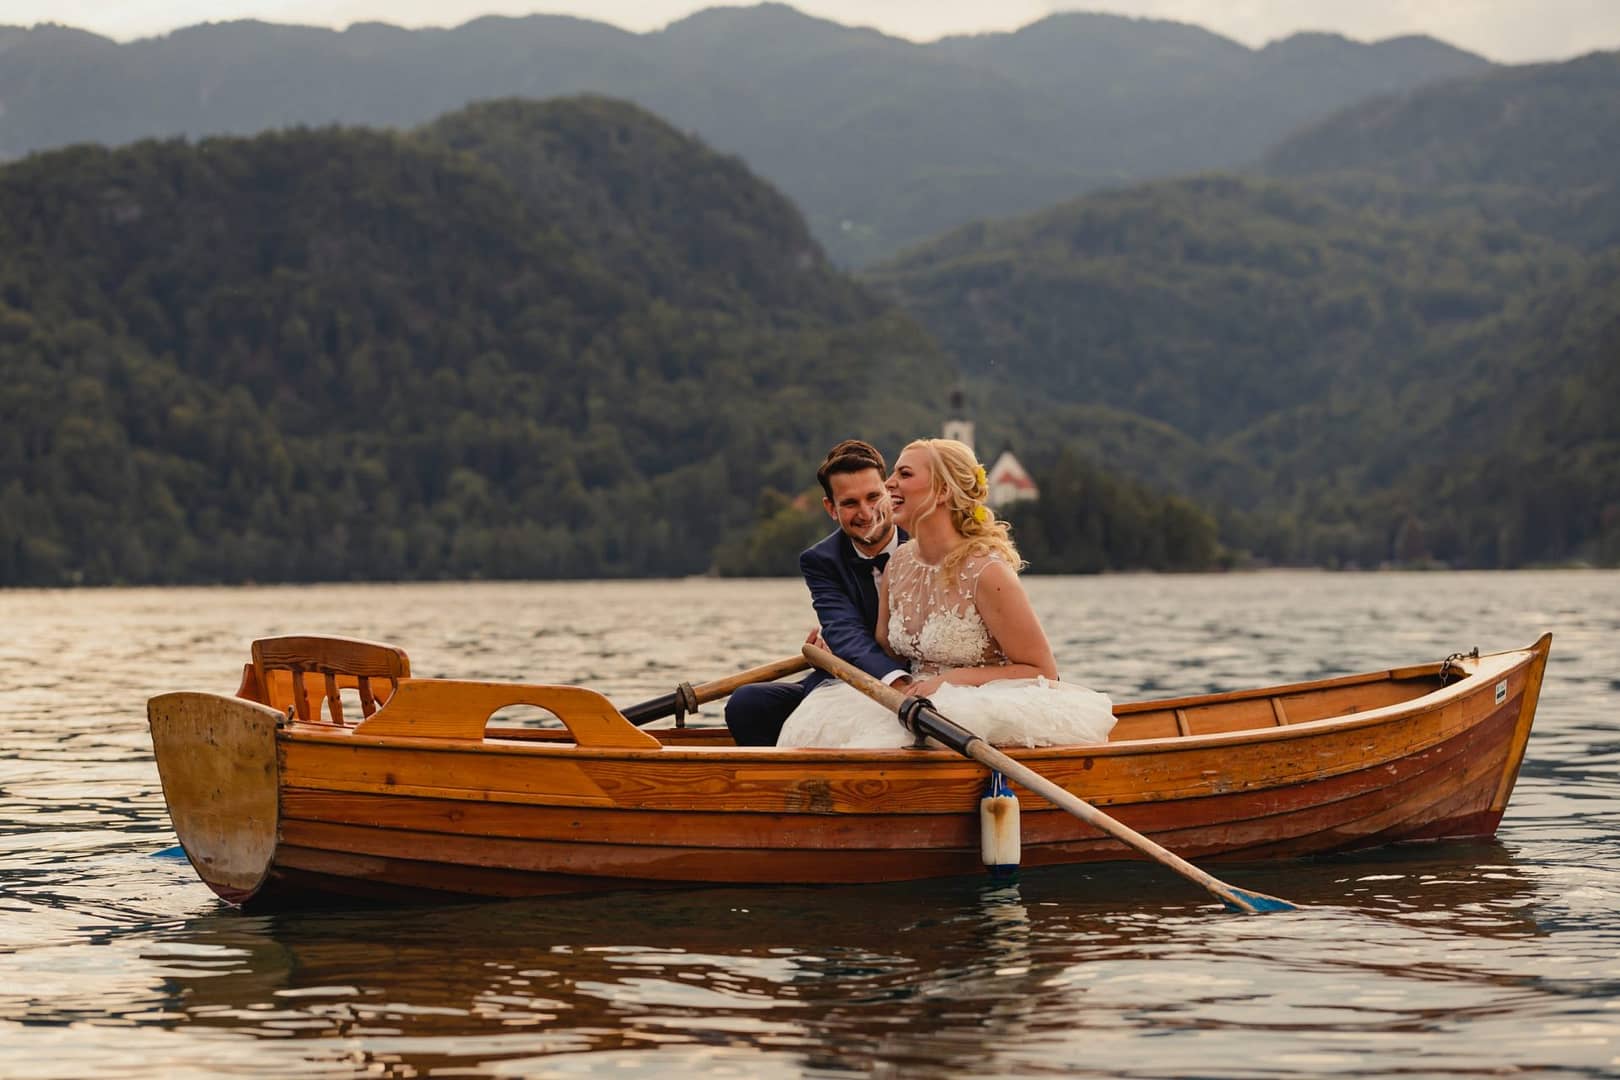 Intimate wedding at Lake Bled, Grand Hotel Toplice and sweets by Ulline dobrote Wedding lake Bled